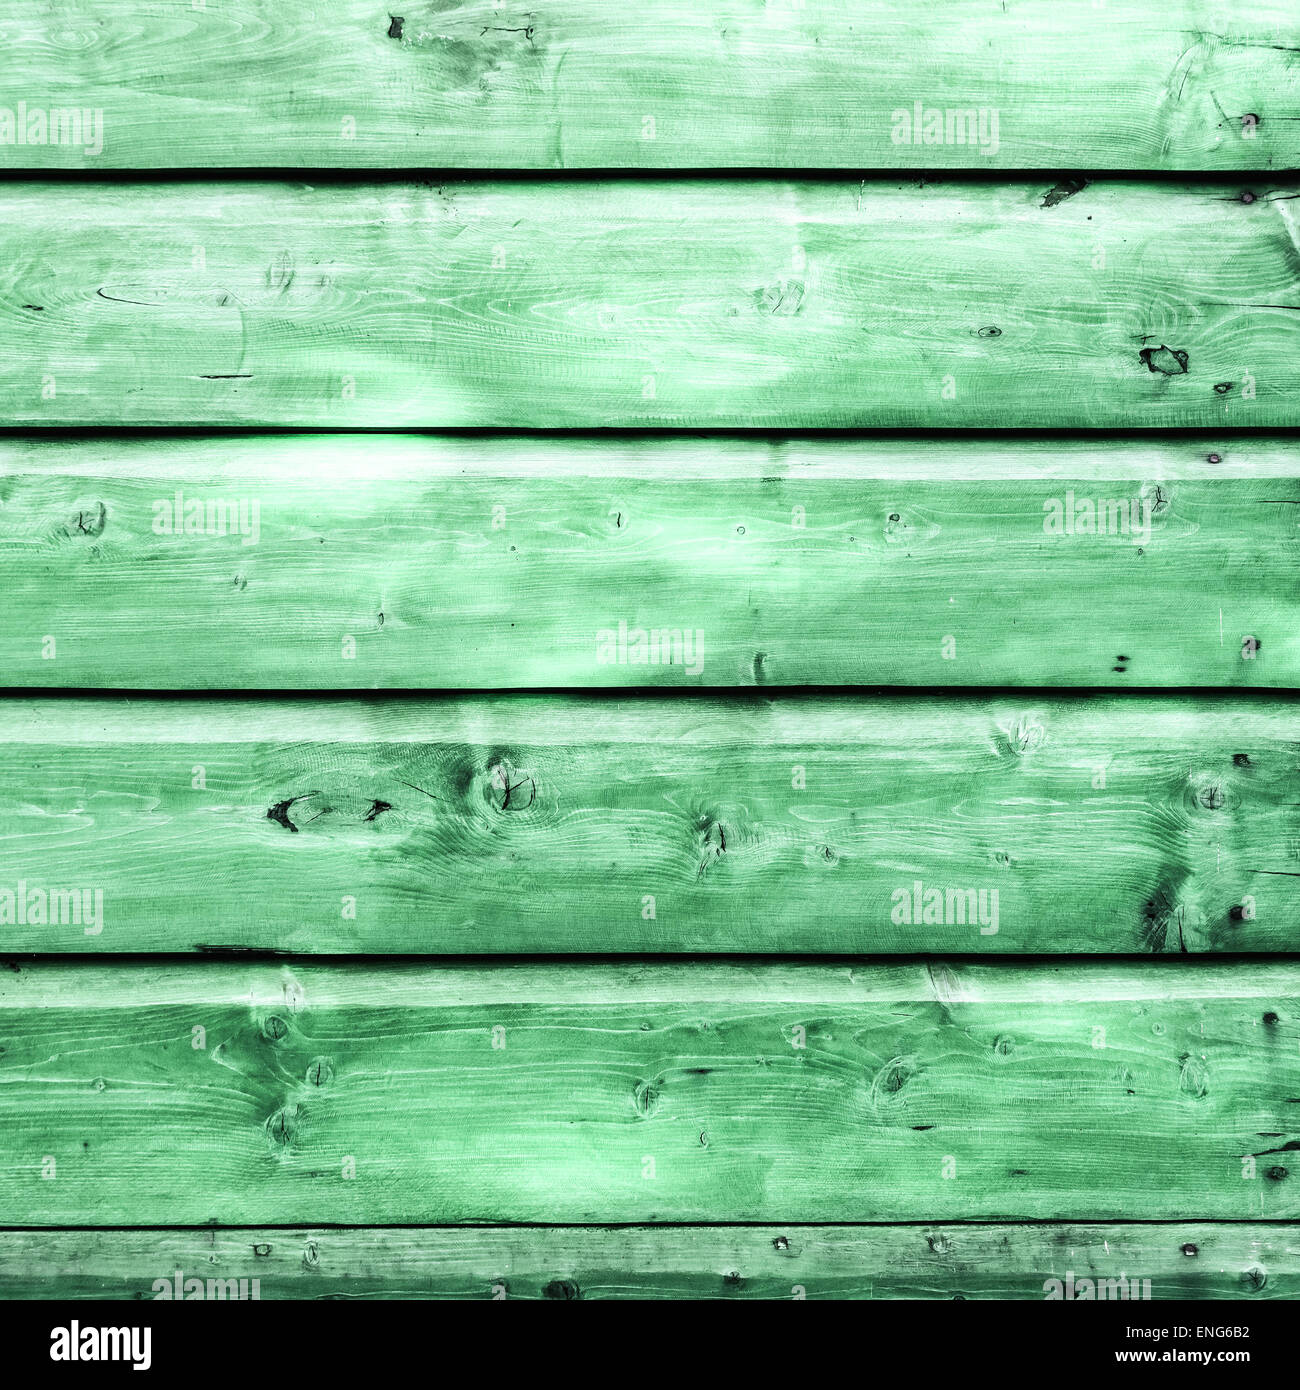 The green wood texture with natural patterns Stock Photo